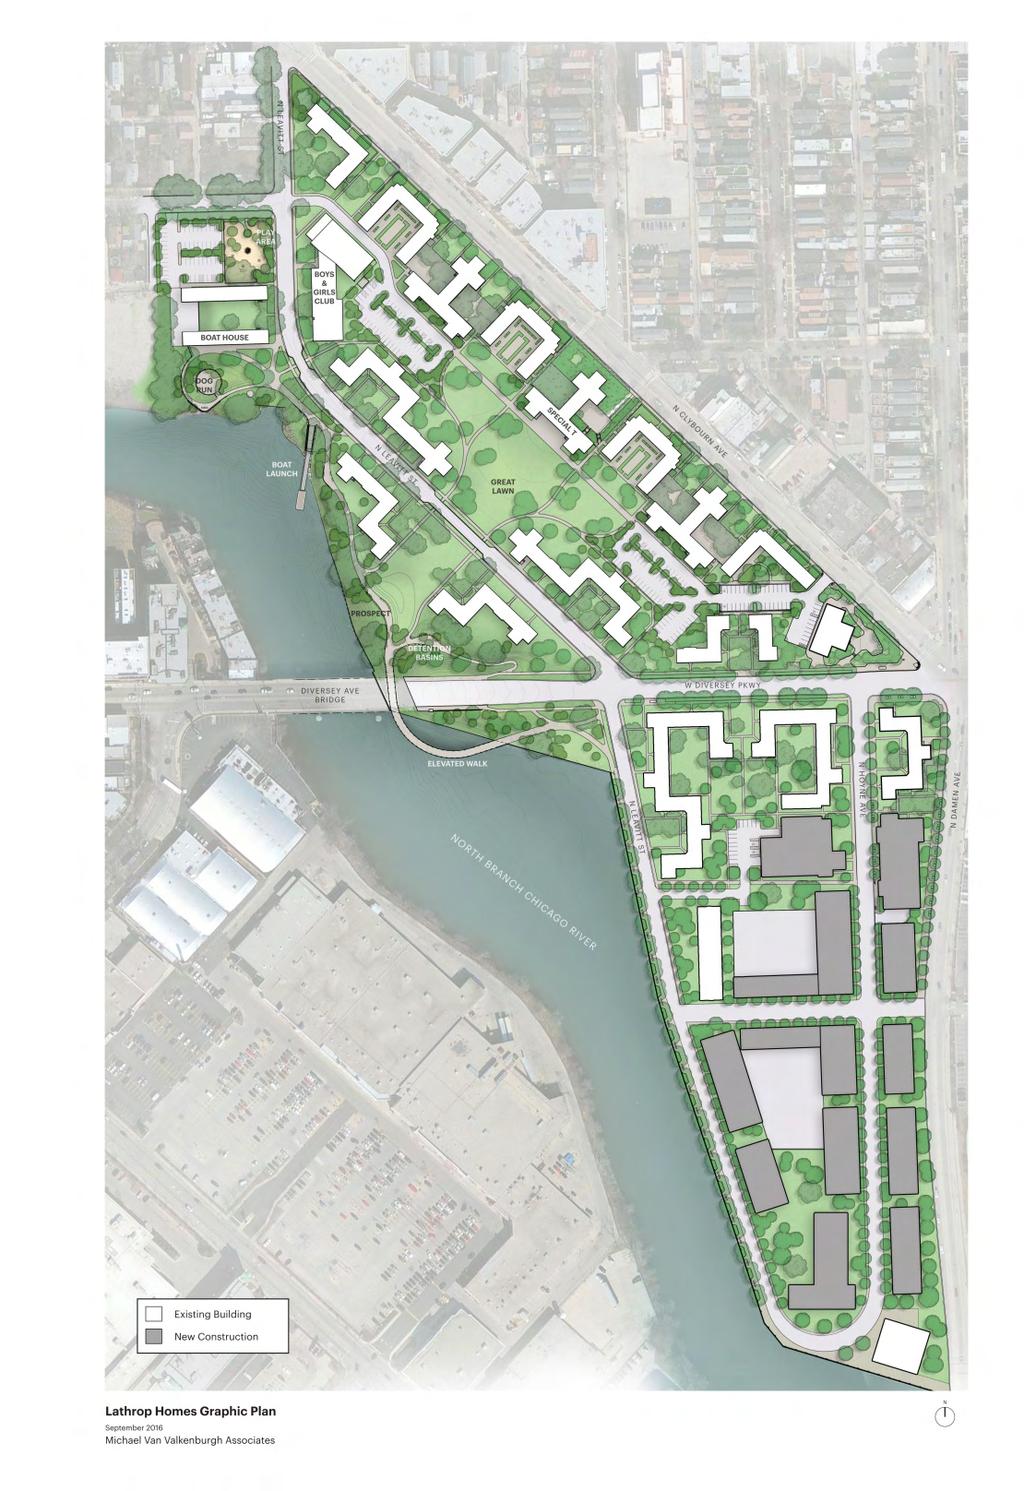 Modification to Original Landscape Plan Modifications to river edge Addition of parking to great lawn